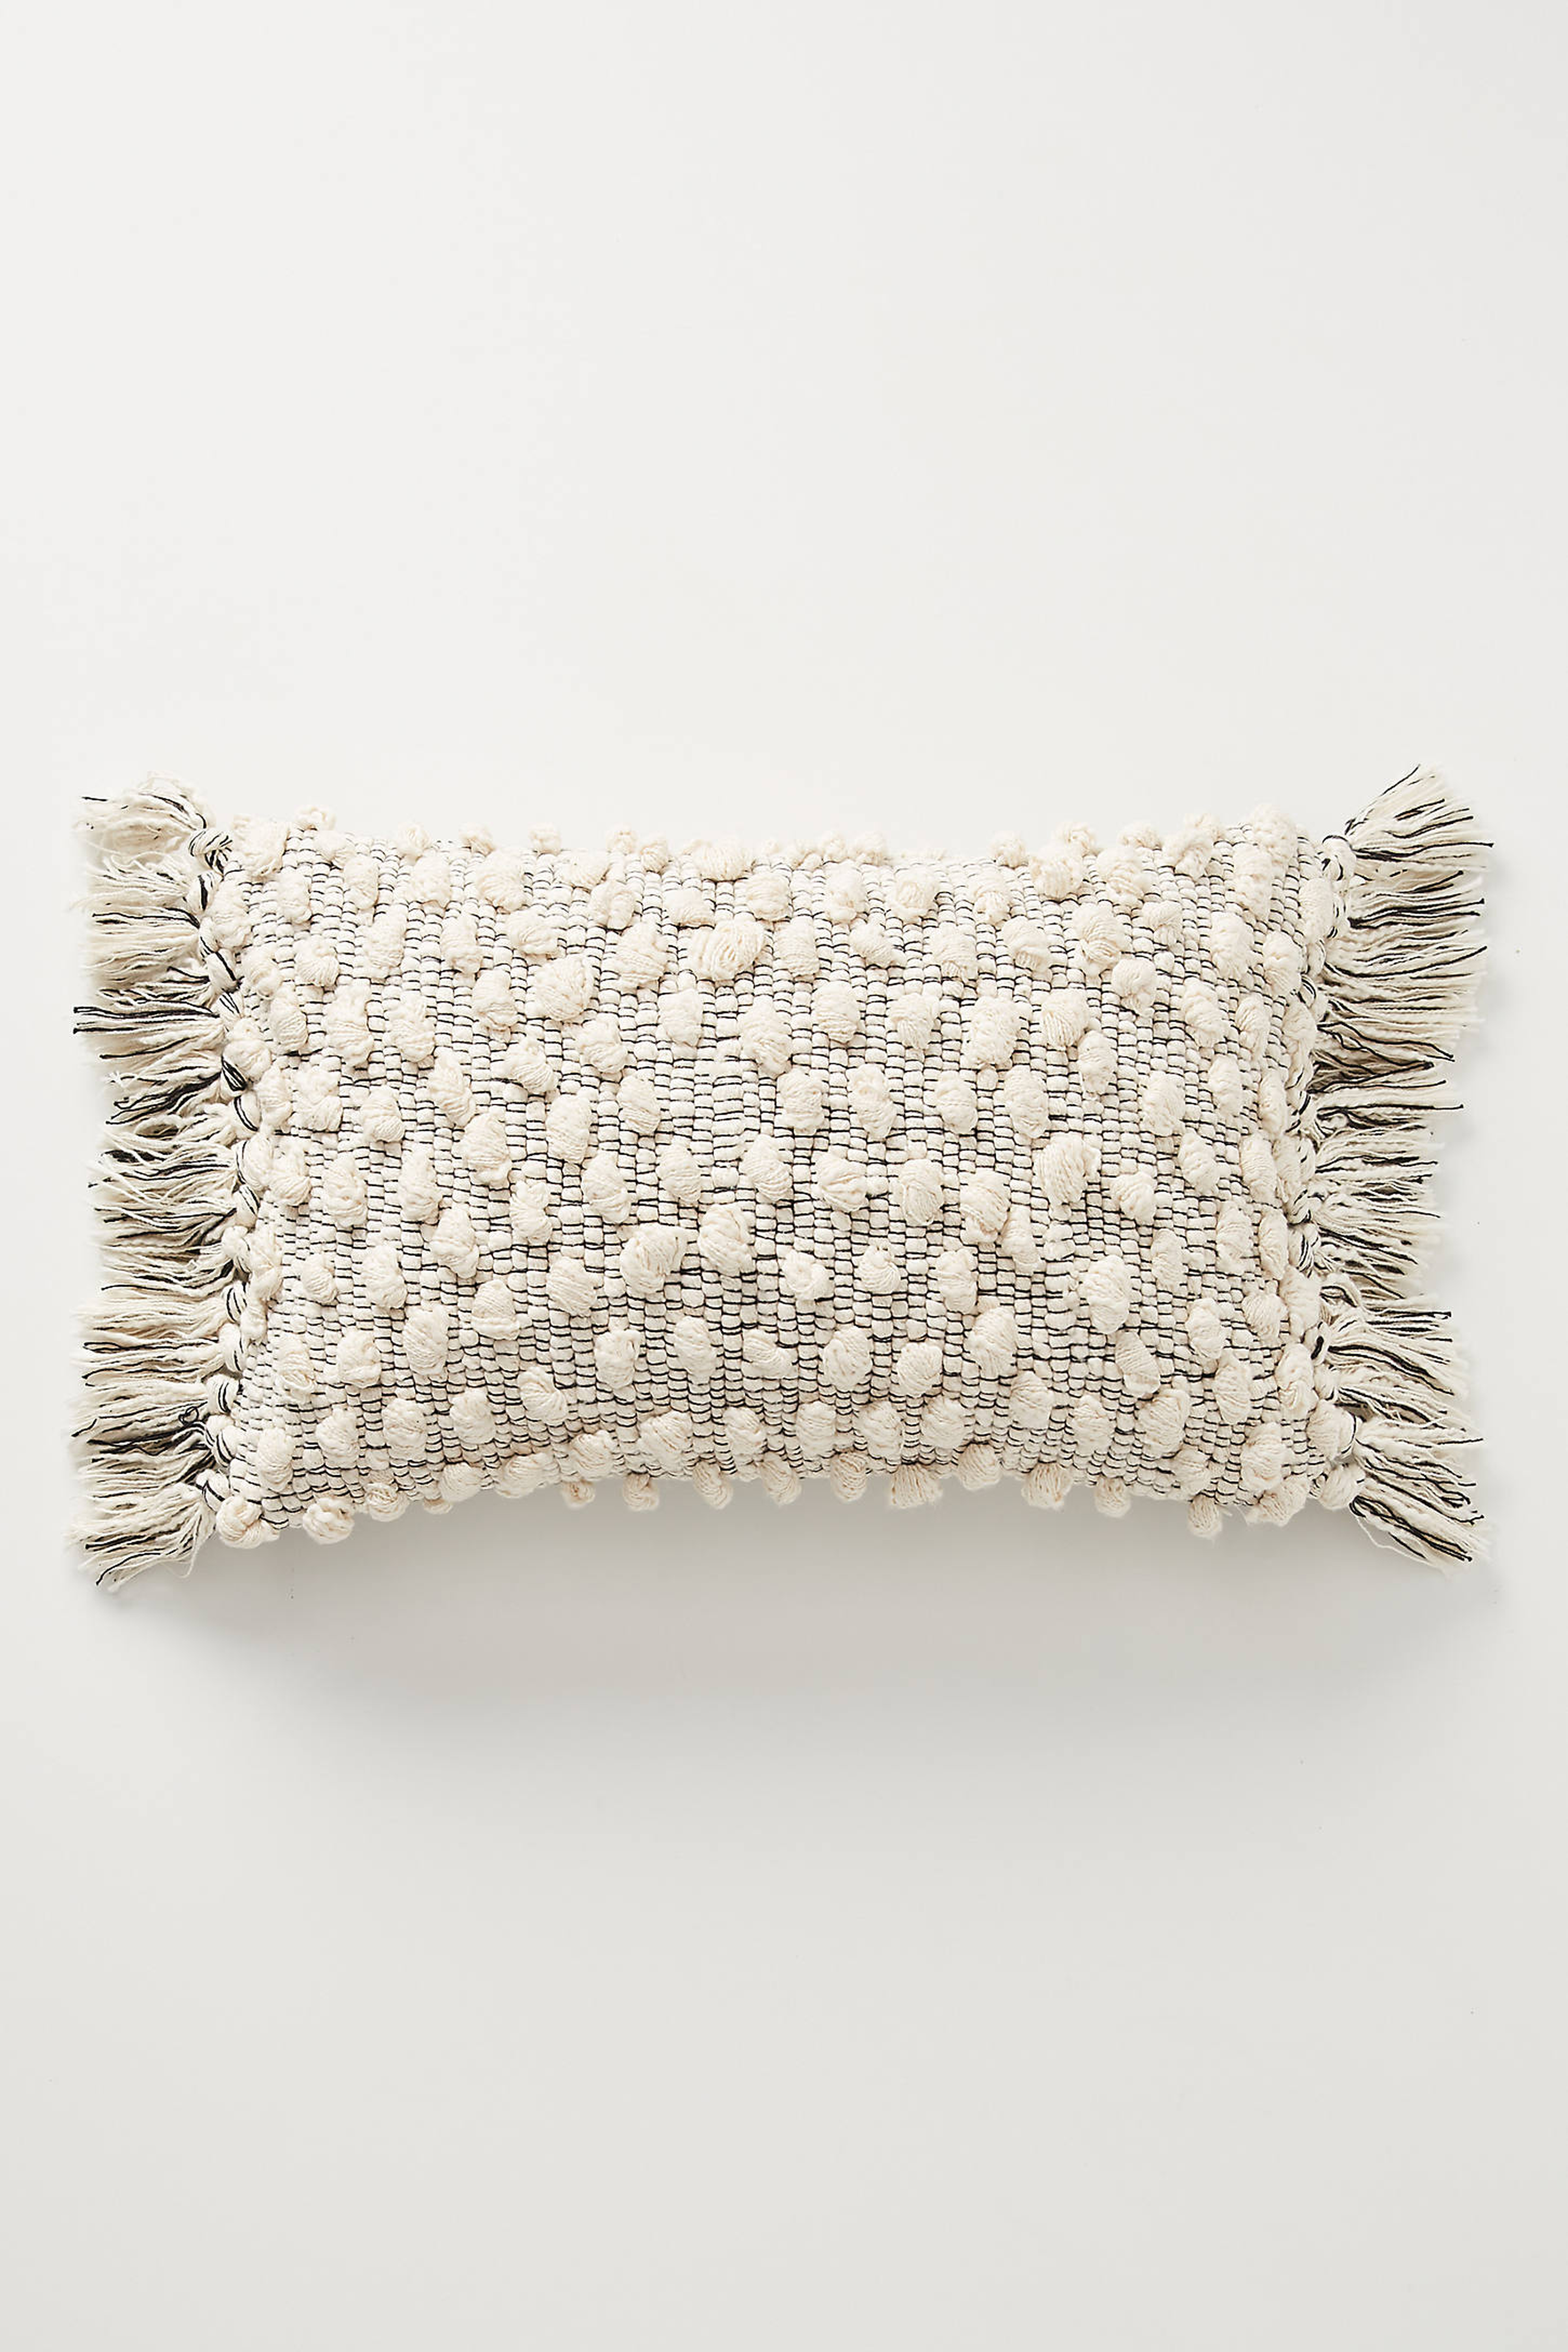 All Roads Yucca Pillow By All Roads Design in Beige Size 12" X 18" - Anthropologie